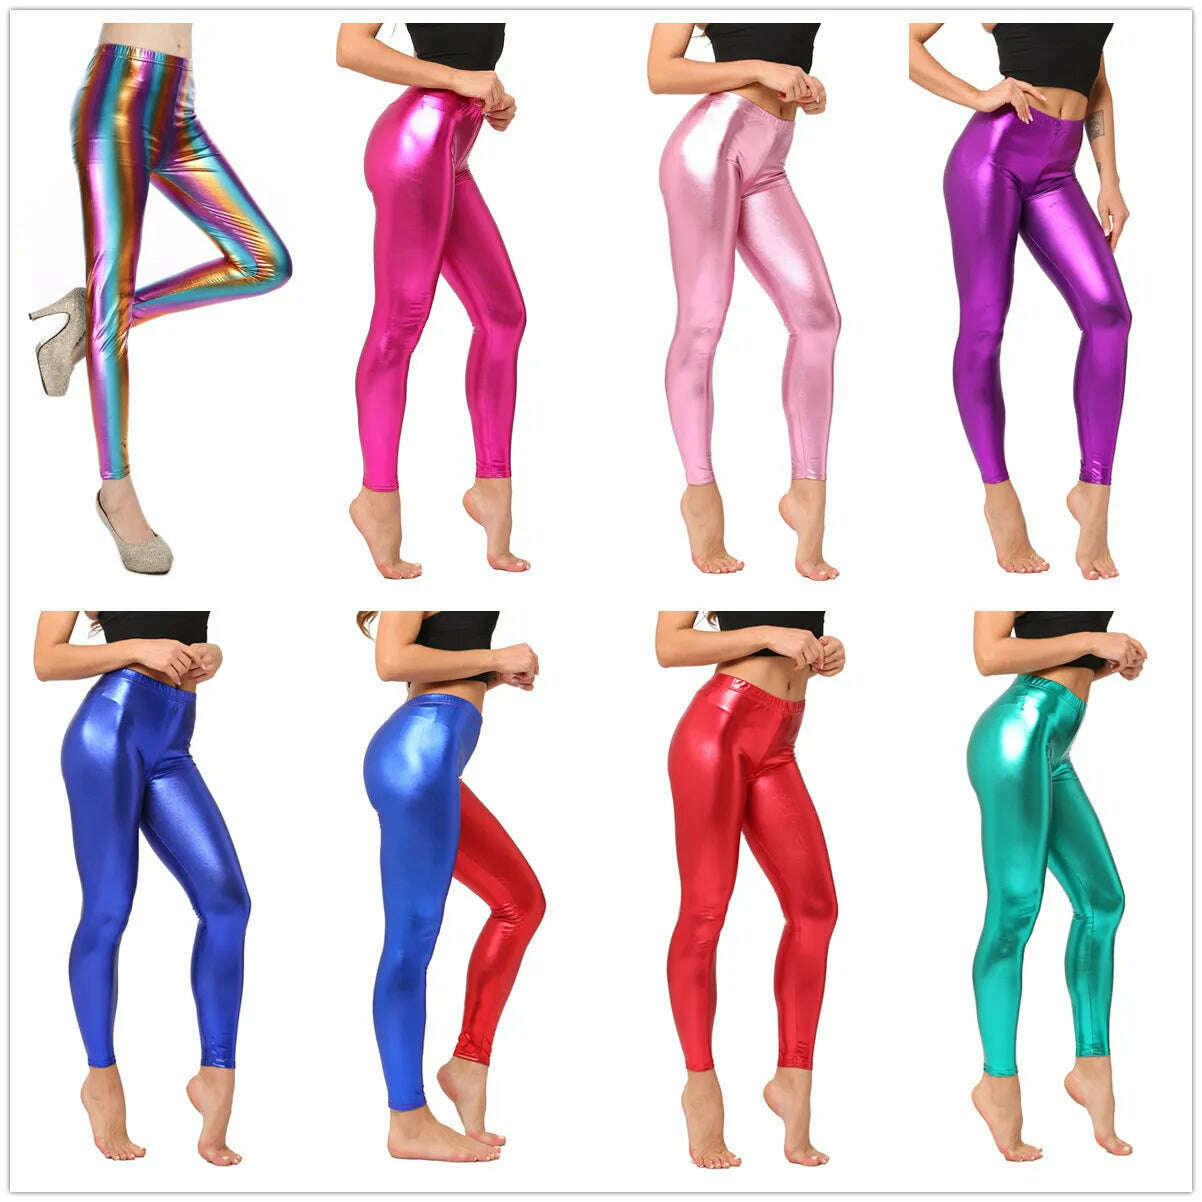 Metallic Color PU Leggings Women Faux Leather Pants Dancing Party Pant Sexy Night Club Skinny Costume Pants Tight Trousers, KIMLUD Women's Clothes